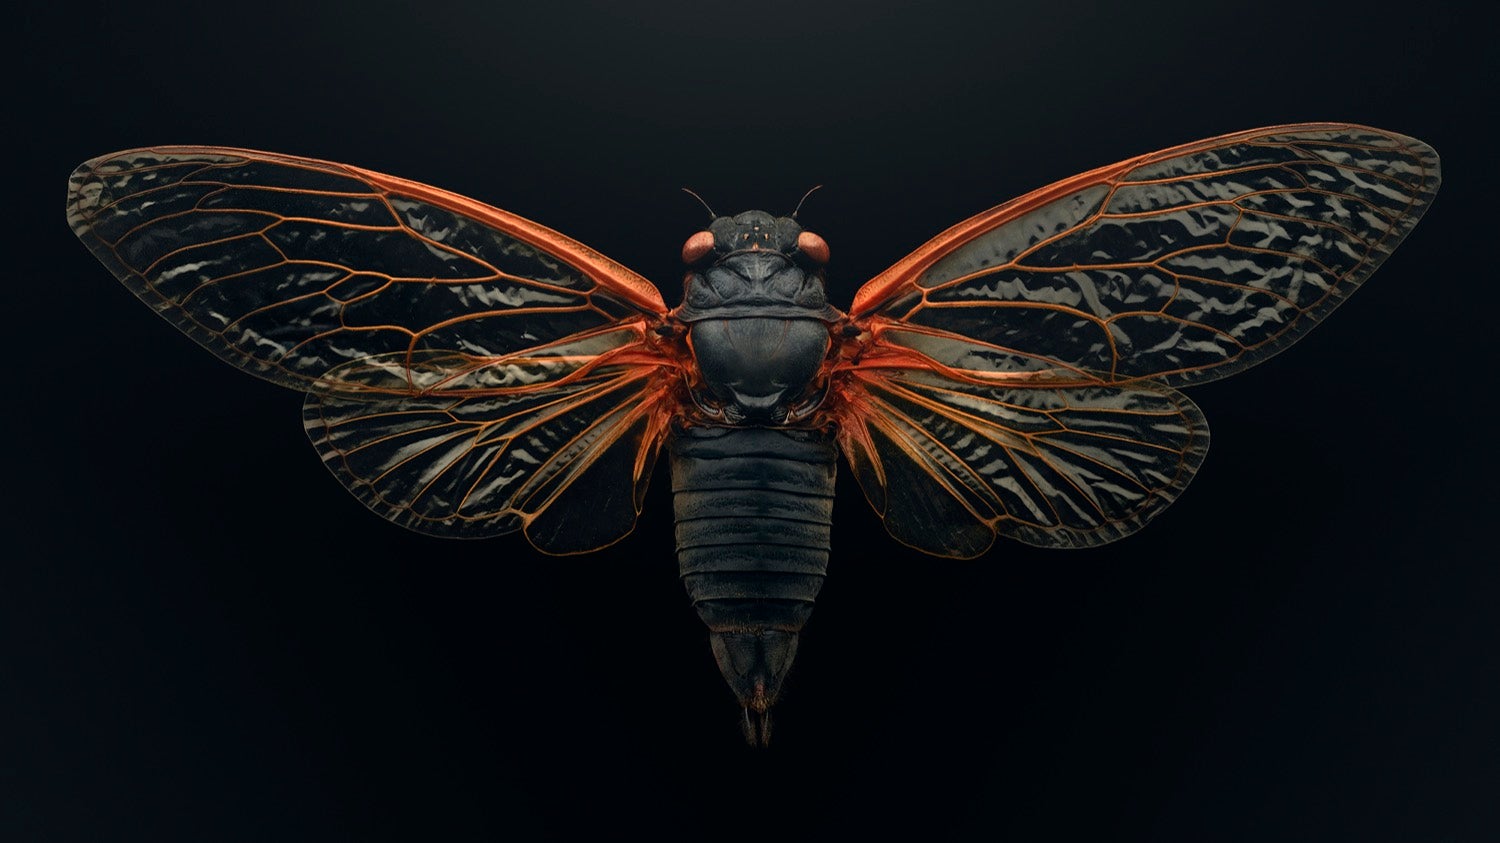 a close up of a black cicada with its wings stretched out